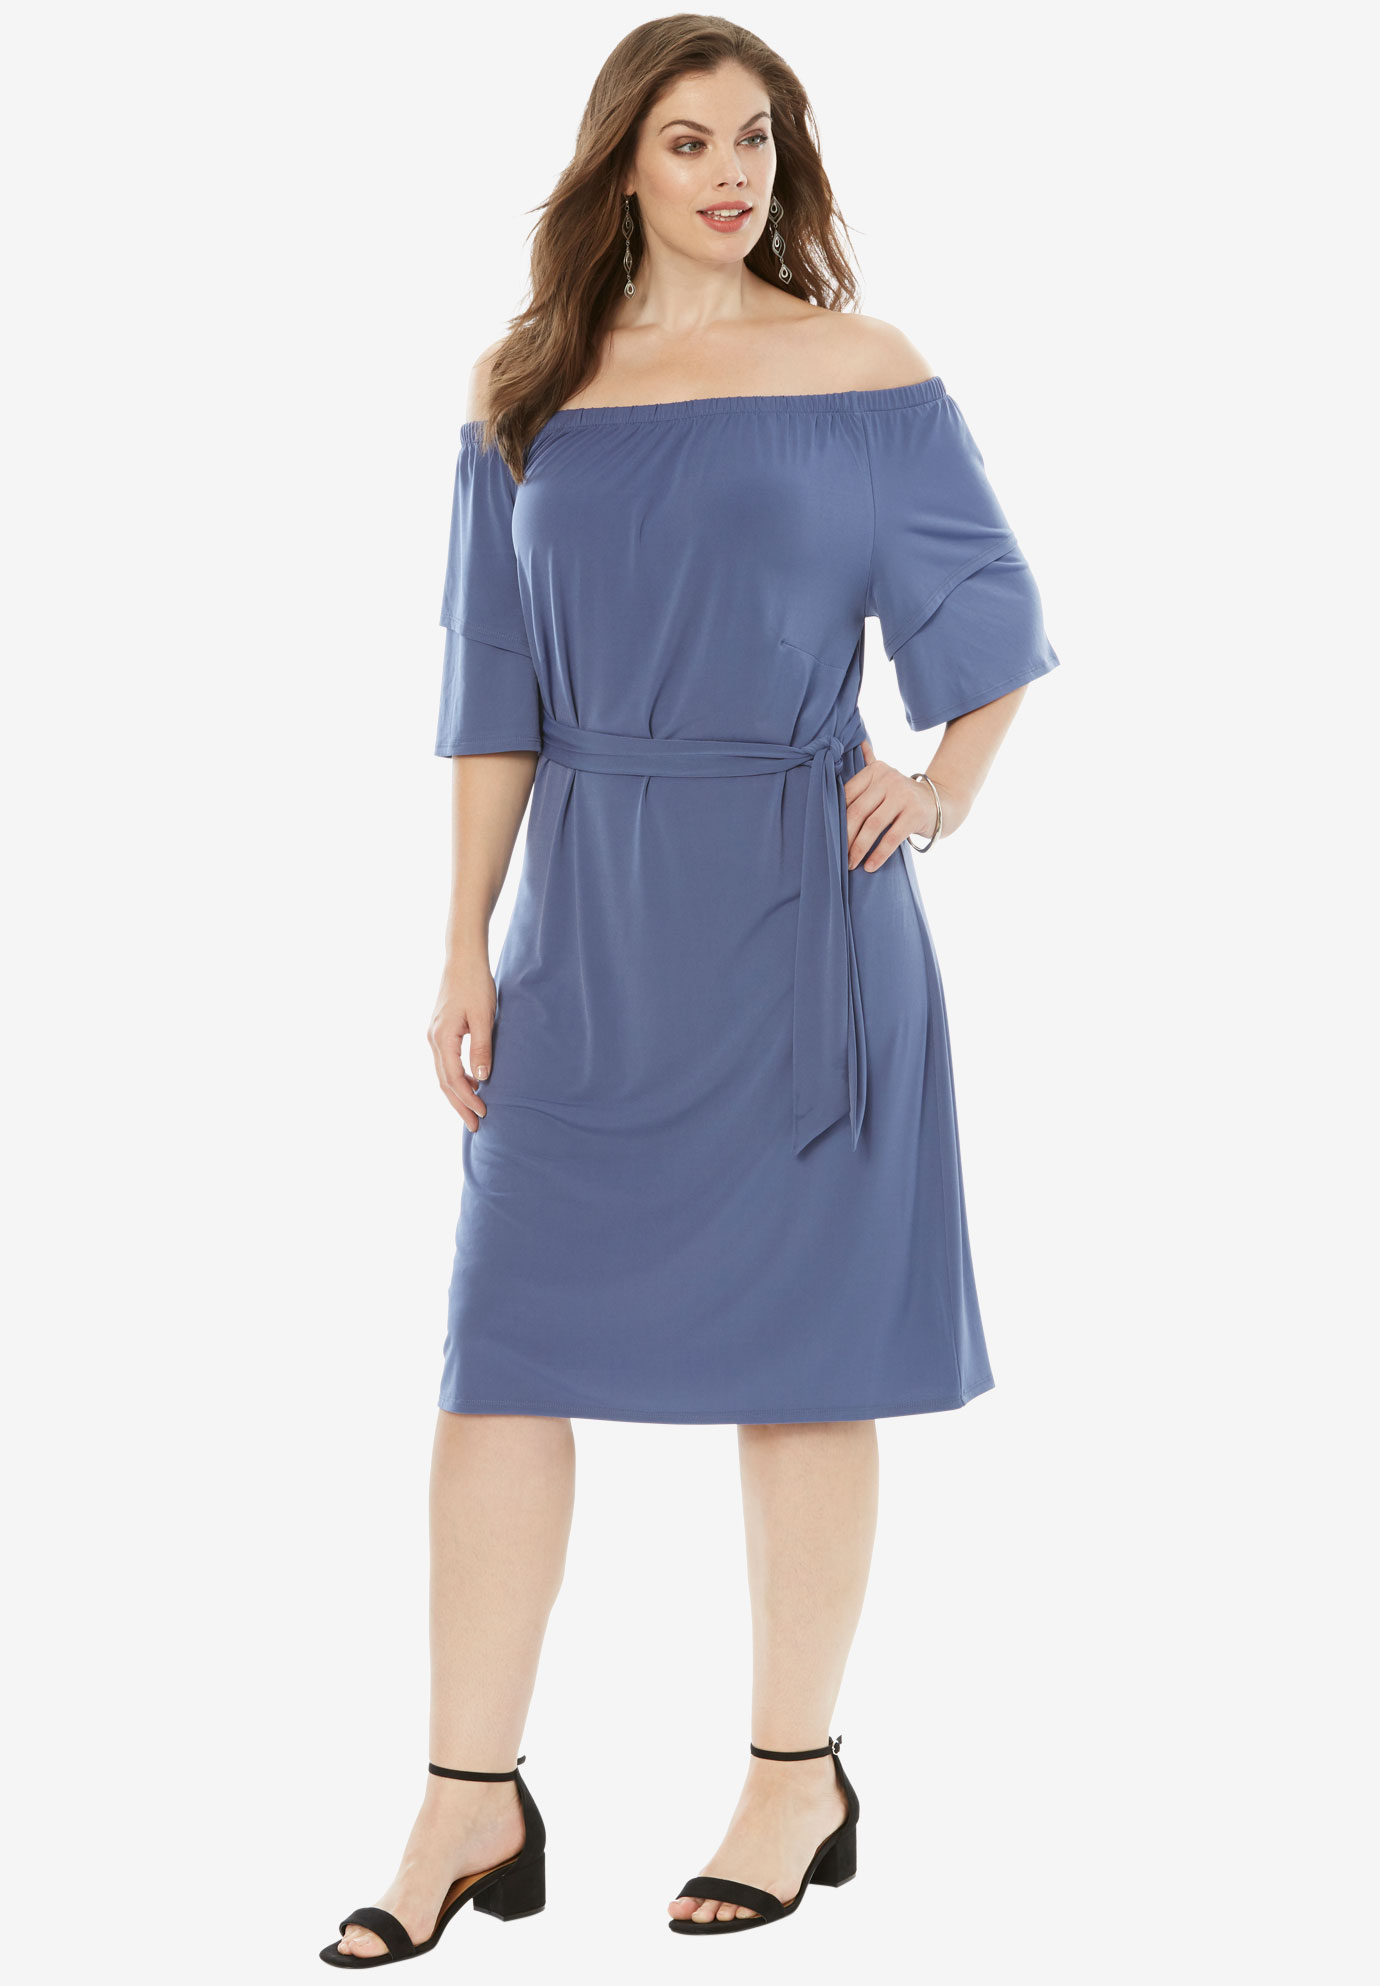 Off-The-Shoulder Ruffle Dress | Plus Size Casual Dresses | Full Beauty